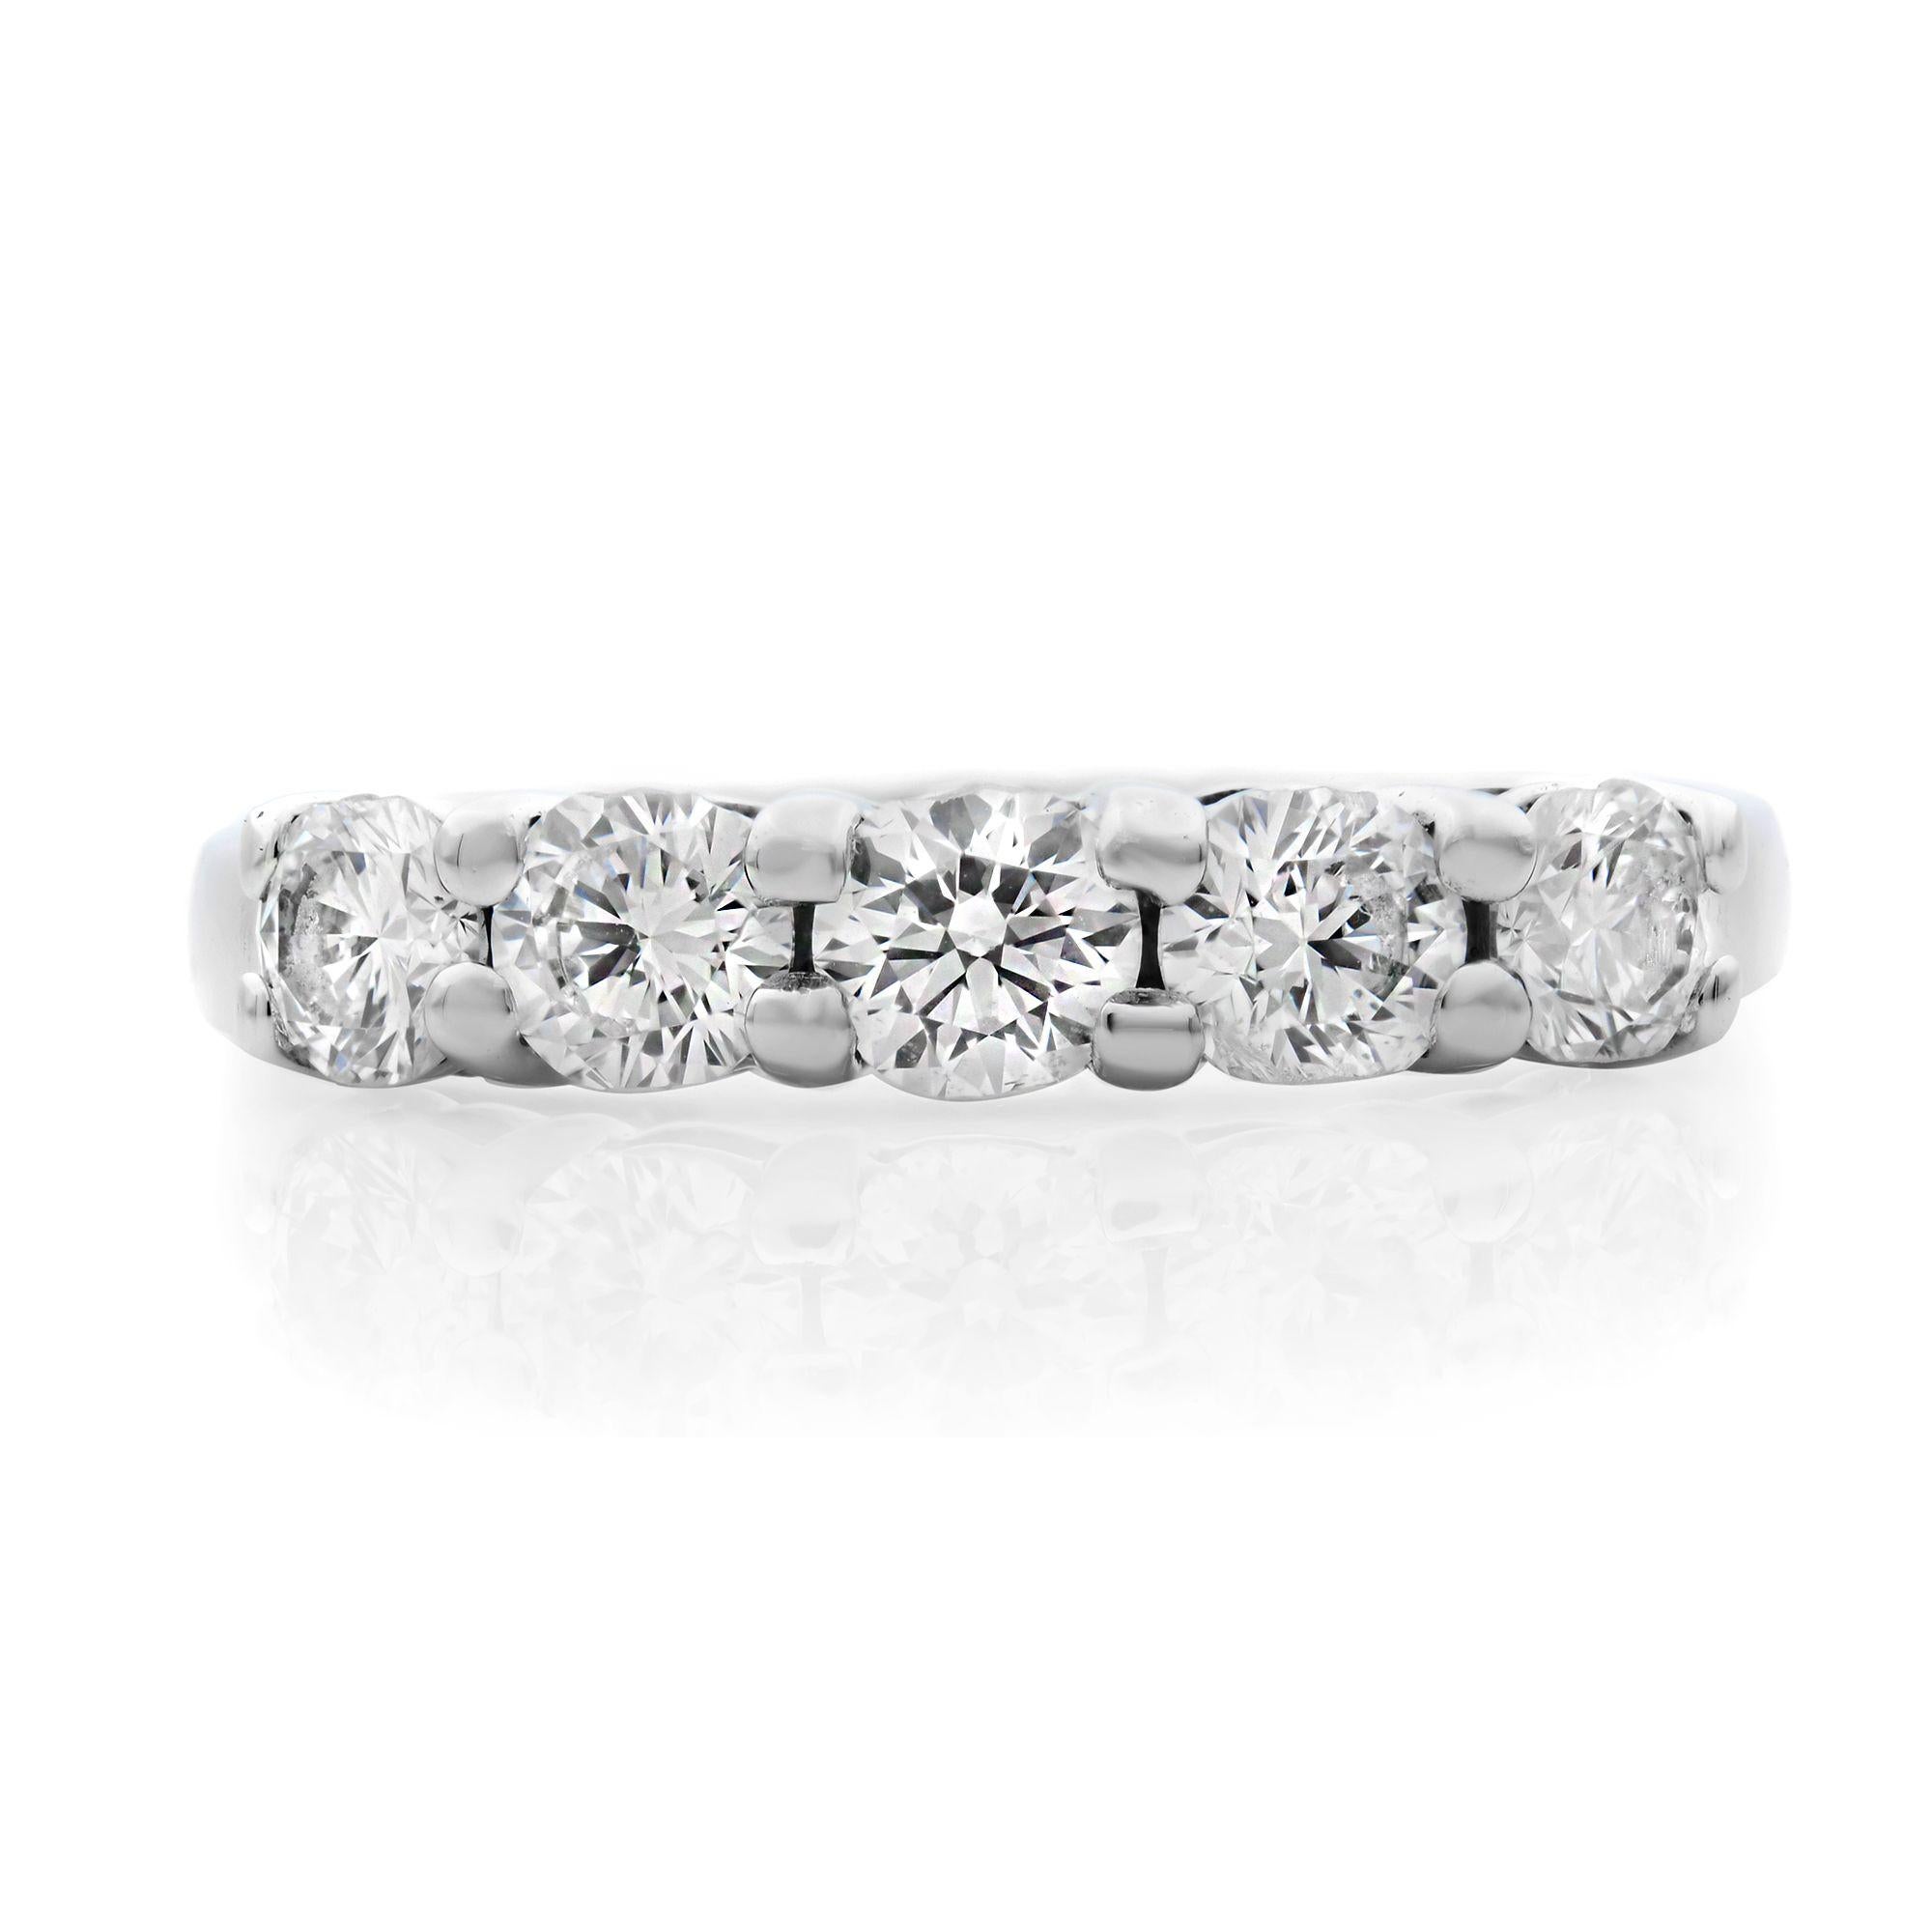 This gorgeous diamond band is crafted in elegant and durable platinum, this timeless wedding band is bedecked with 5 round diamonds in a shared prong setting. Width of the ring 3.50mm. Ring size 6. Pre-owned condition. Approx. diamond carat weight